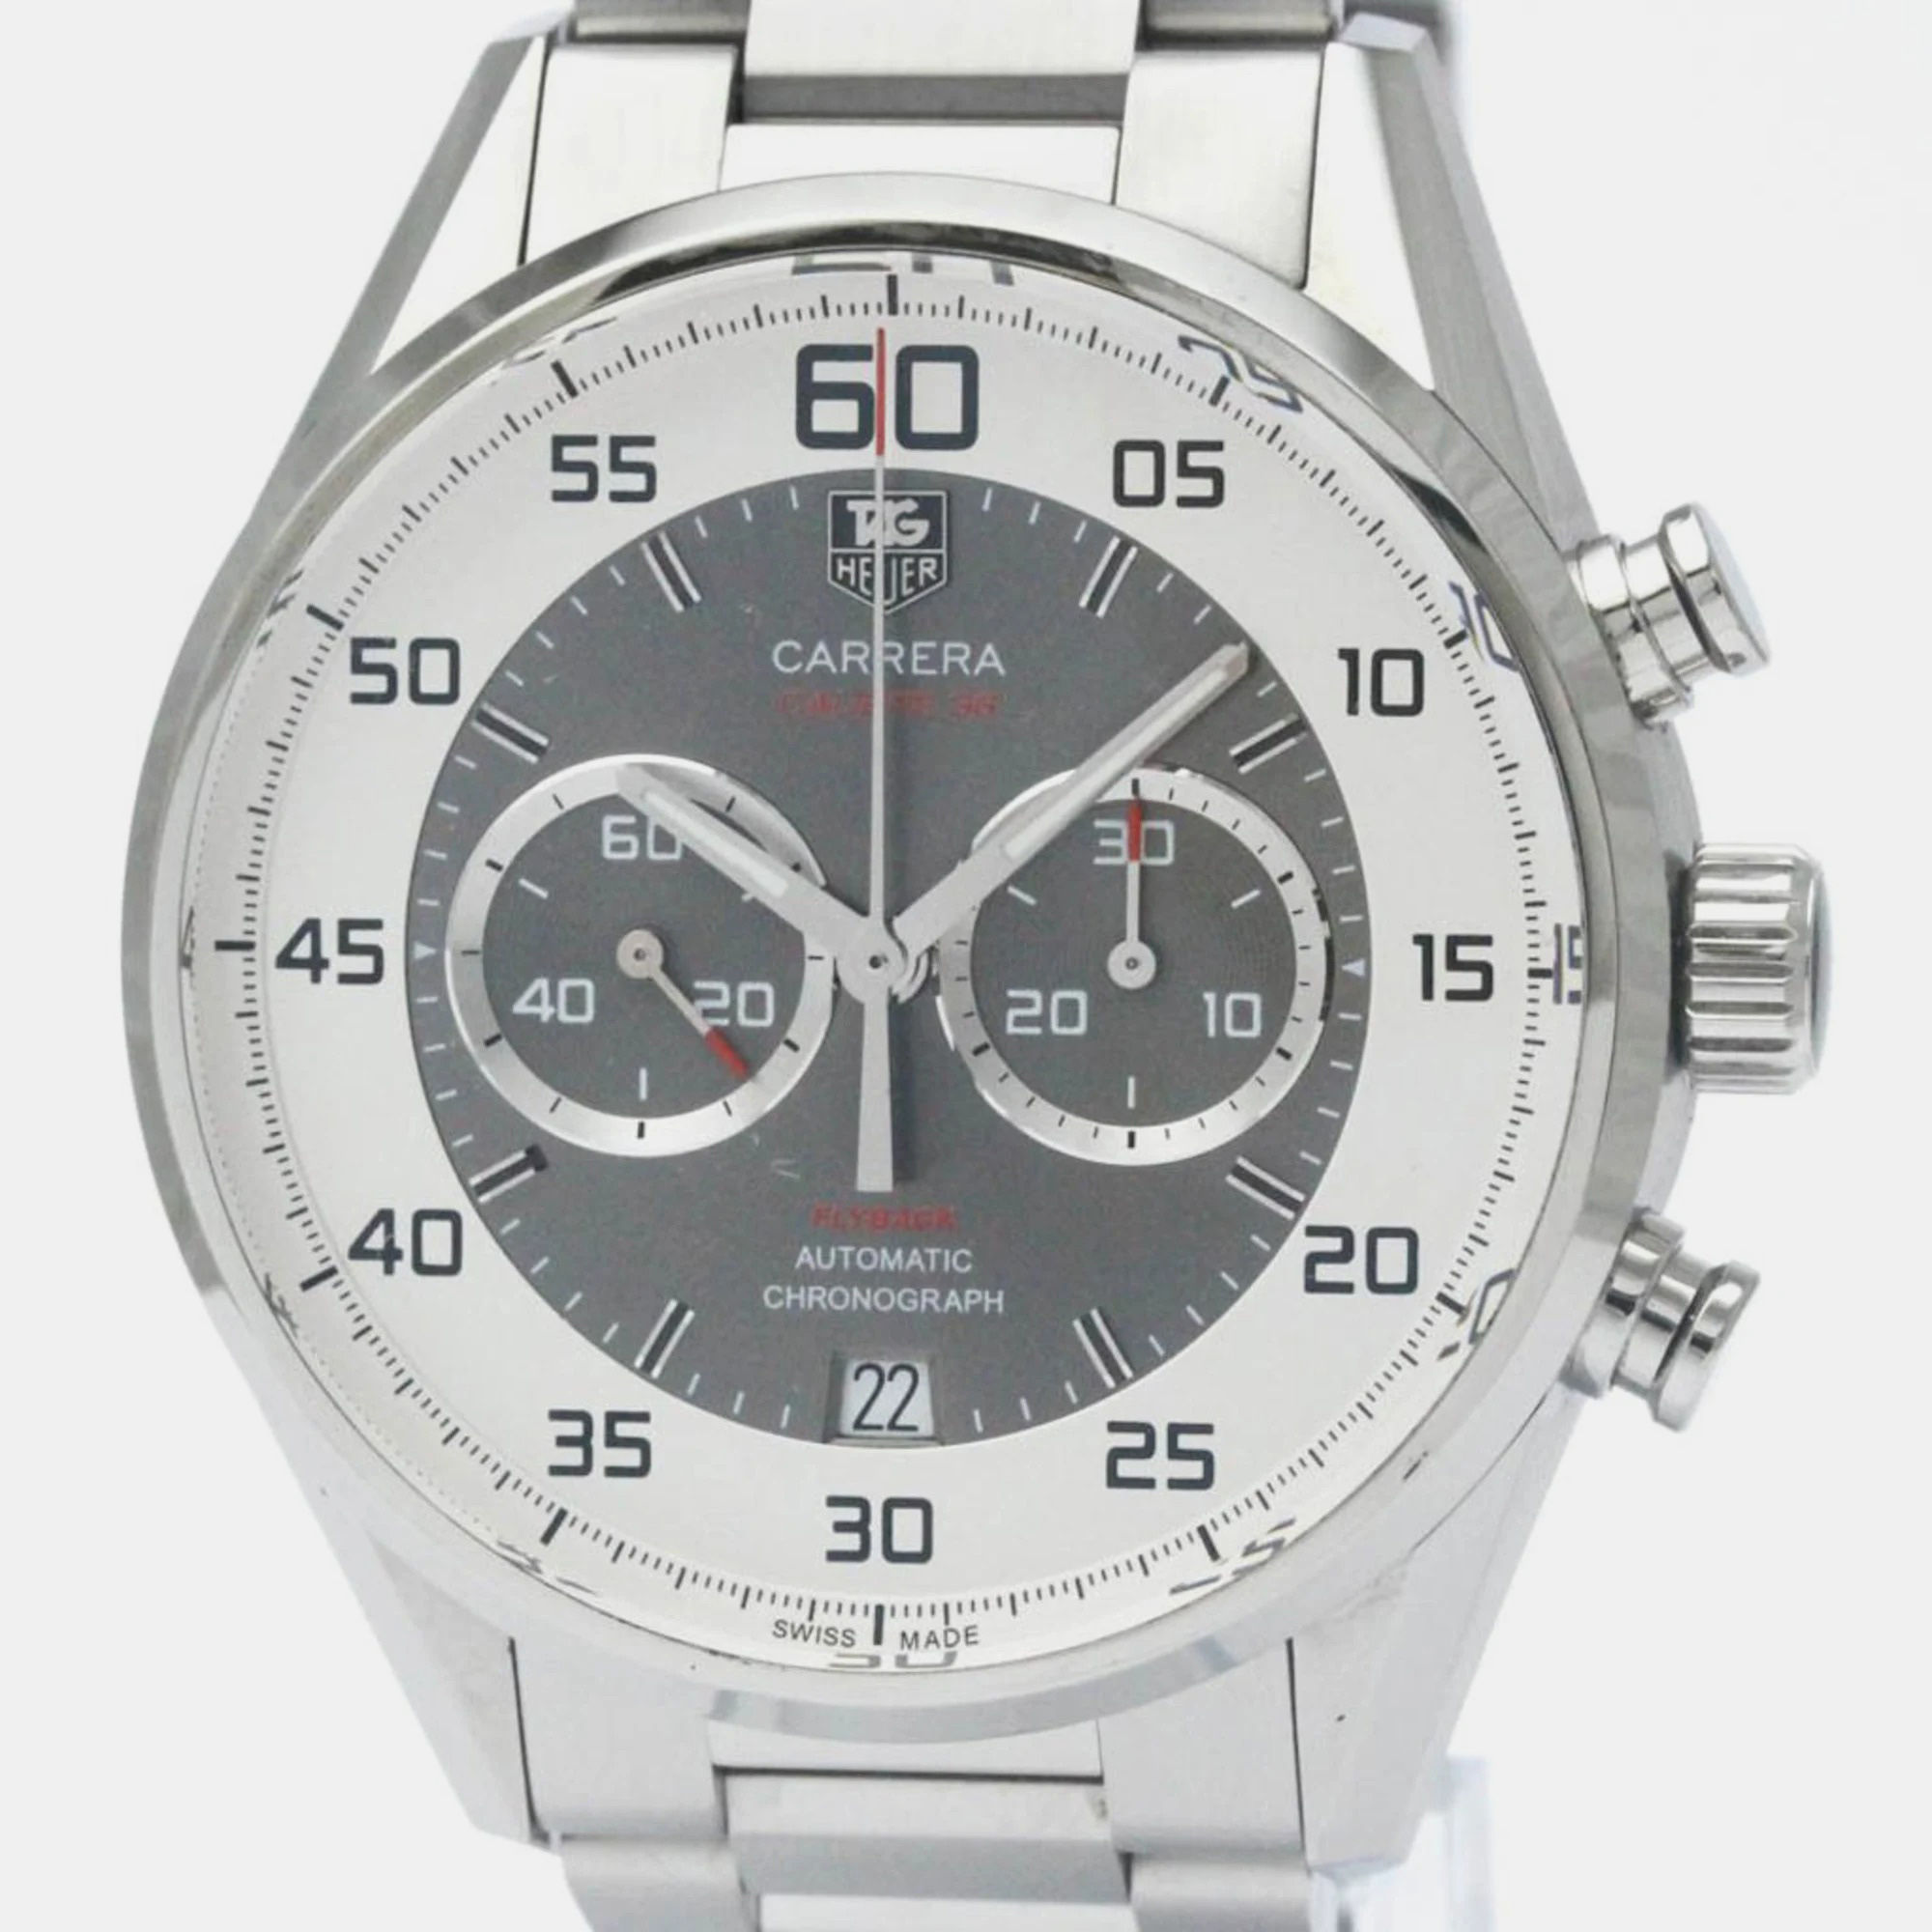 

Tag Heuer Grey Stainless Steel Carrera CAR2B11 Automatic Men's Wristwatch 43 mm